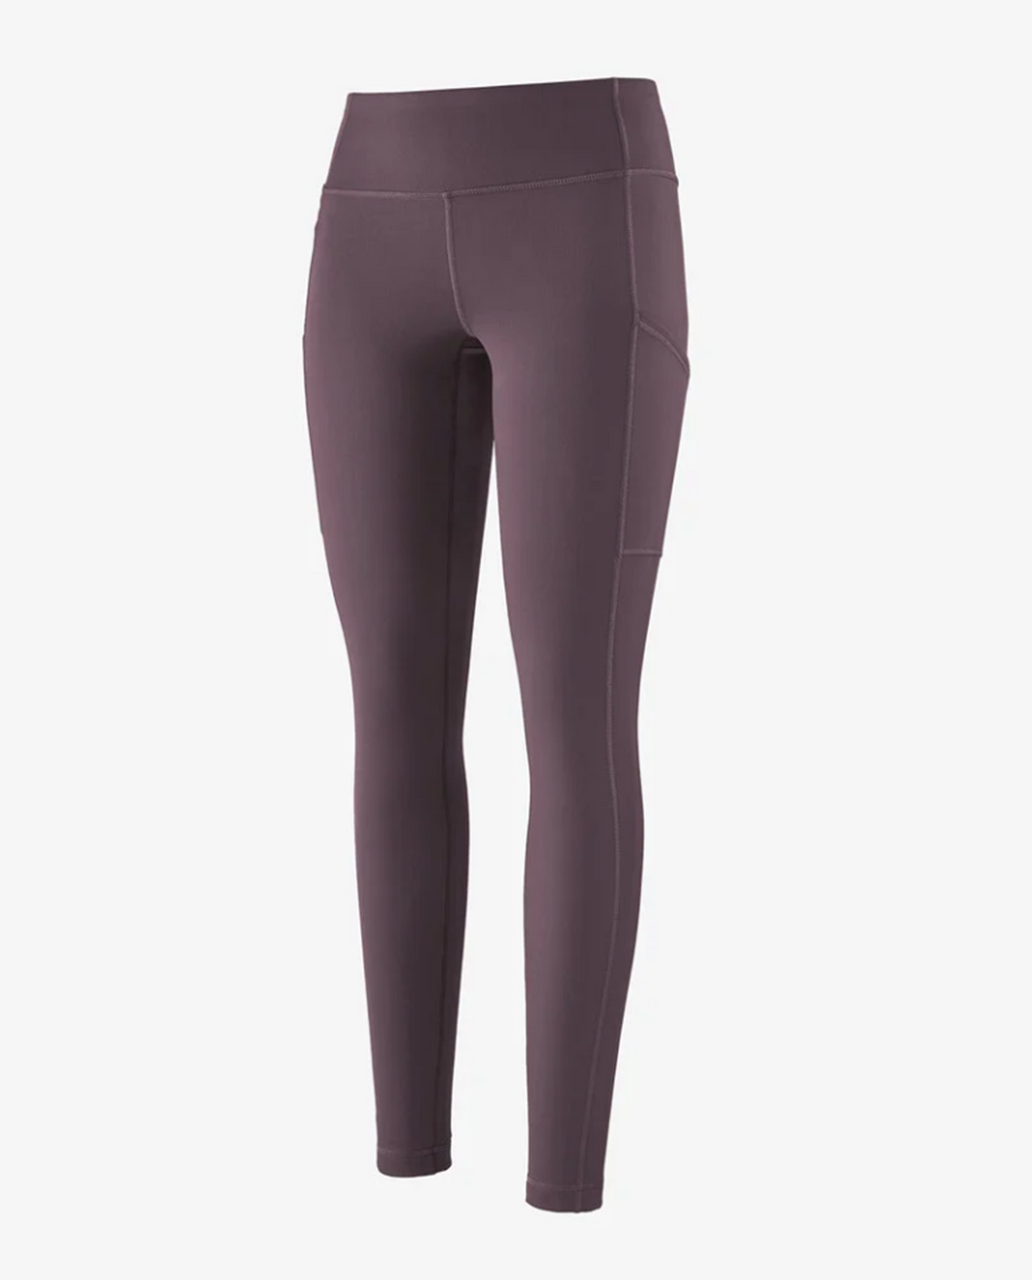 https://cdn11.bigcommerce.com/s-kkqtn7nqjc/images/stencil/1280x1280/products/3718/45510/189b7270PATAGONIA-Pack-Out-Tights-21995_BABN__10711.1633561338.png?c=1